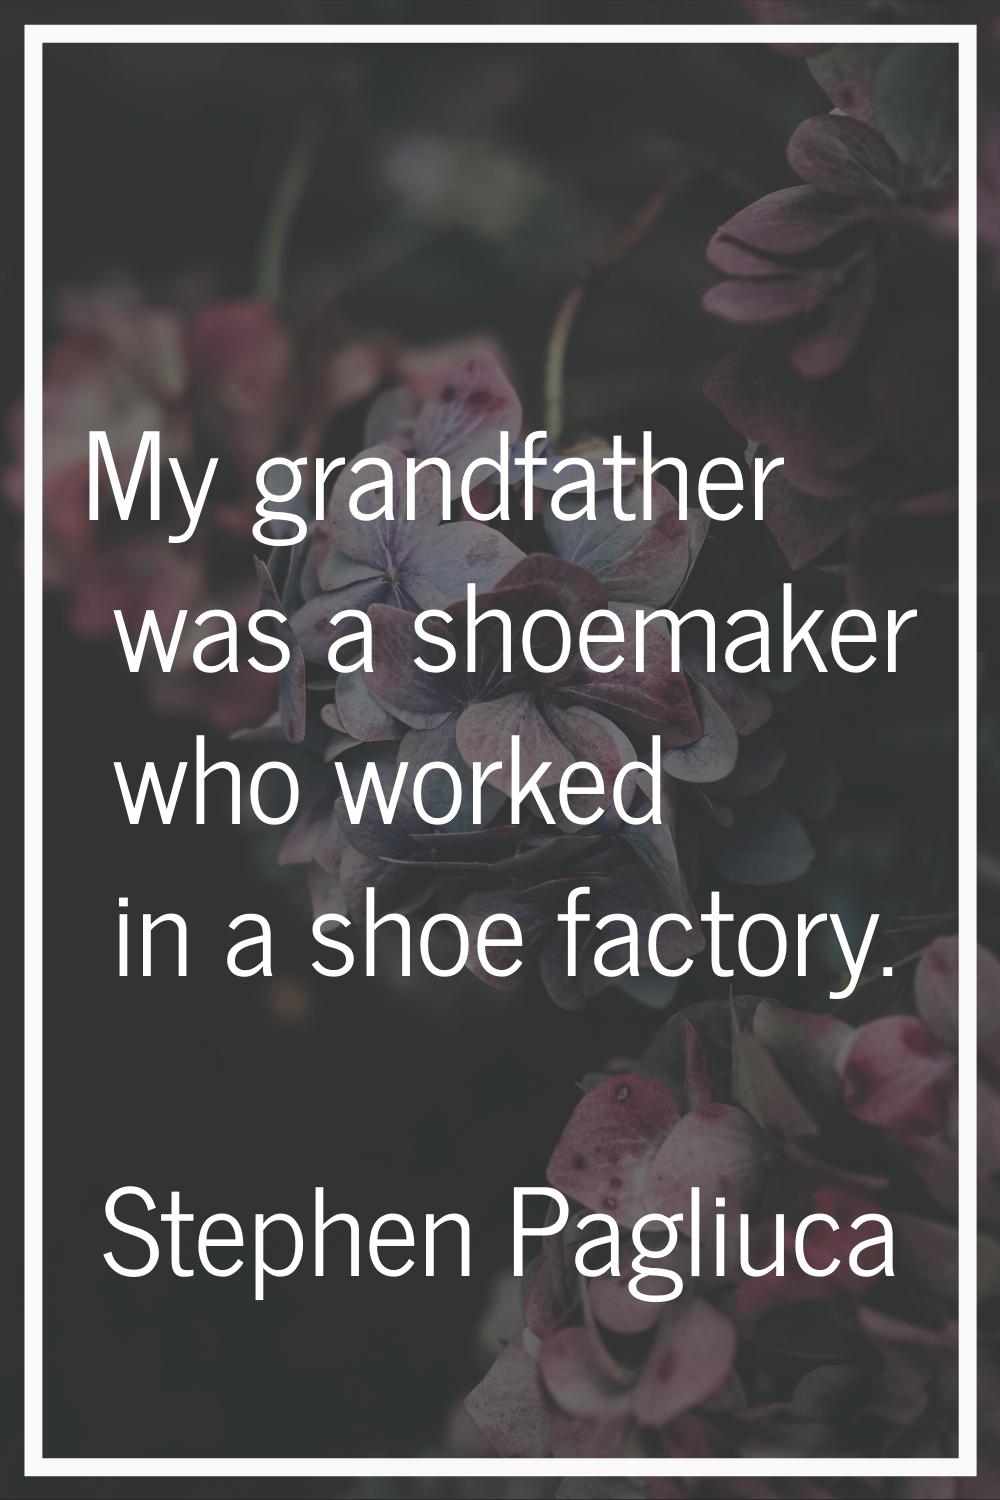 My grandfather was a shoemaker who worked in a shoe factory.